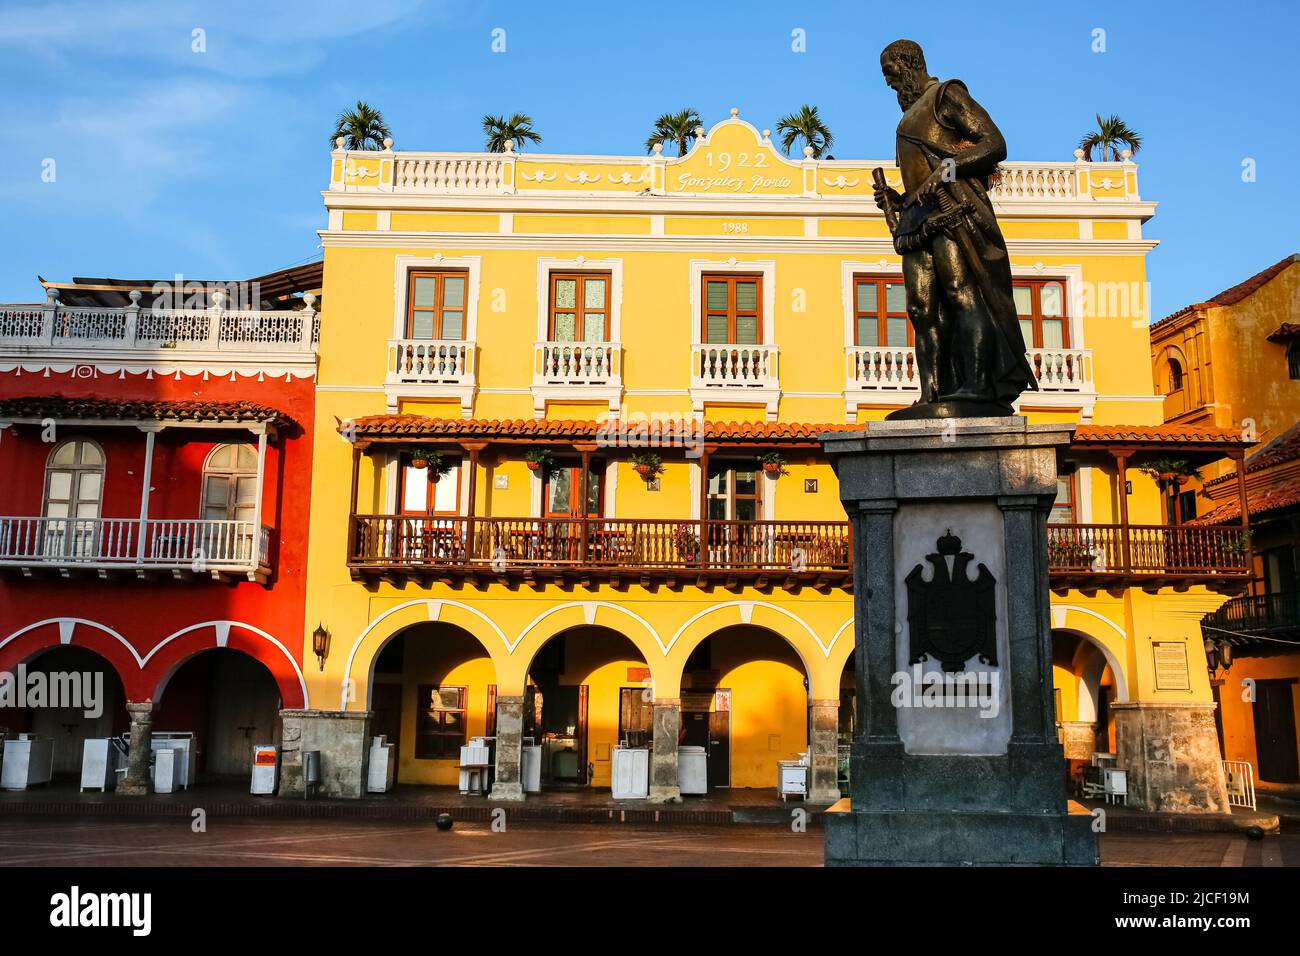 Colorful historic buildings at Plaza de los Cochem (Carriages square) on a sunny day in Cartagena with statue in the shadow Stock Photo